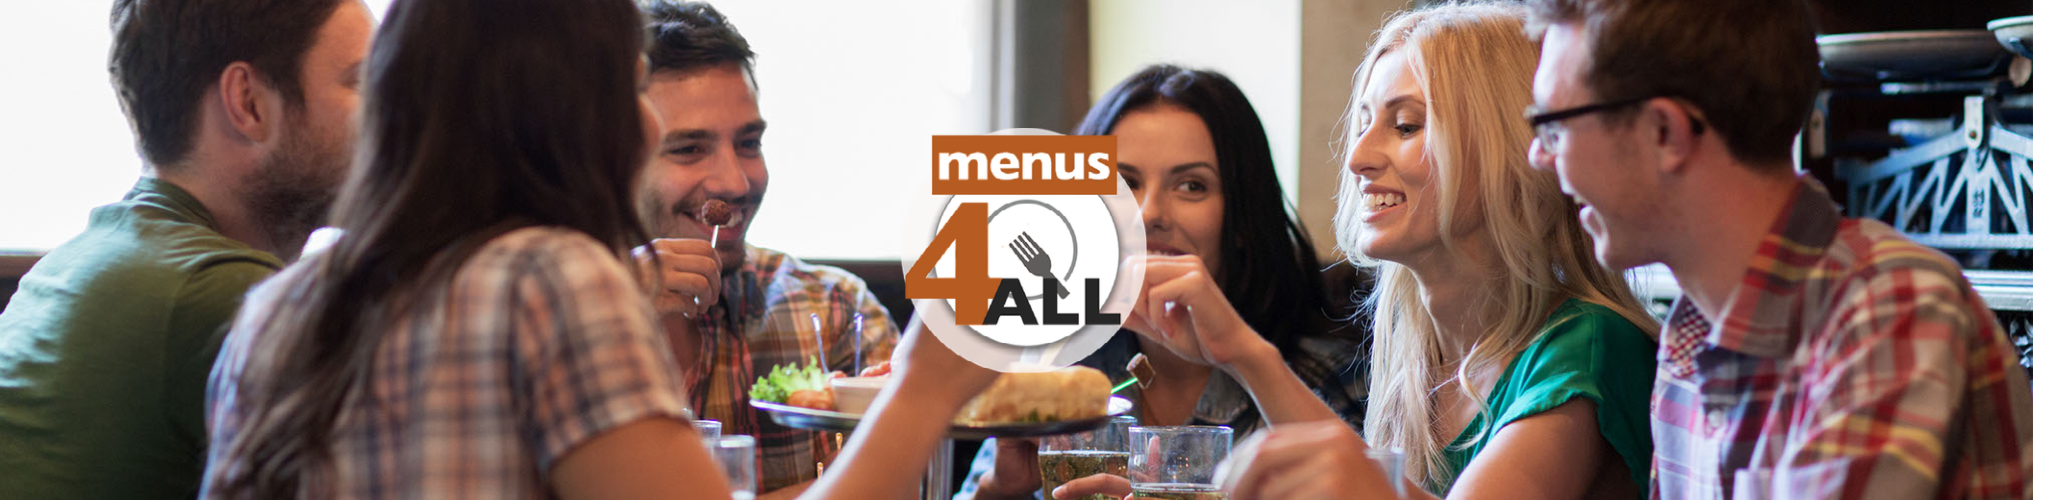 6 friends at a restaurant happy hour sharing an assortment of appetizers over drinks. Plus Menus 4 ALL logo.